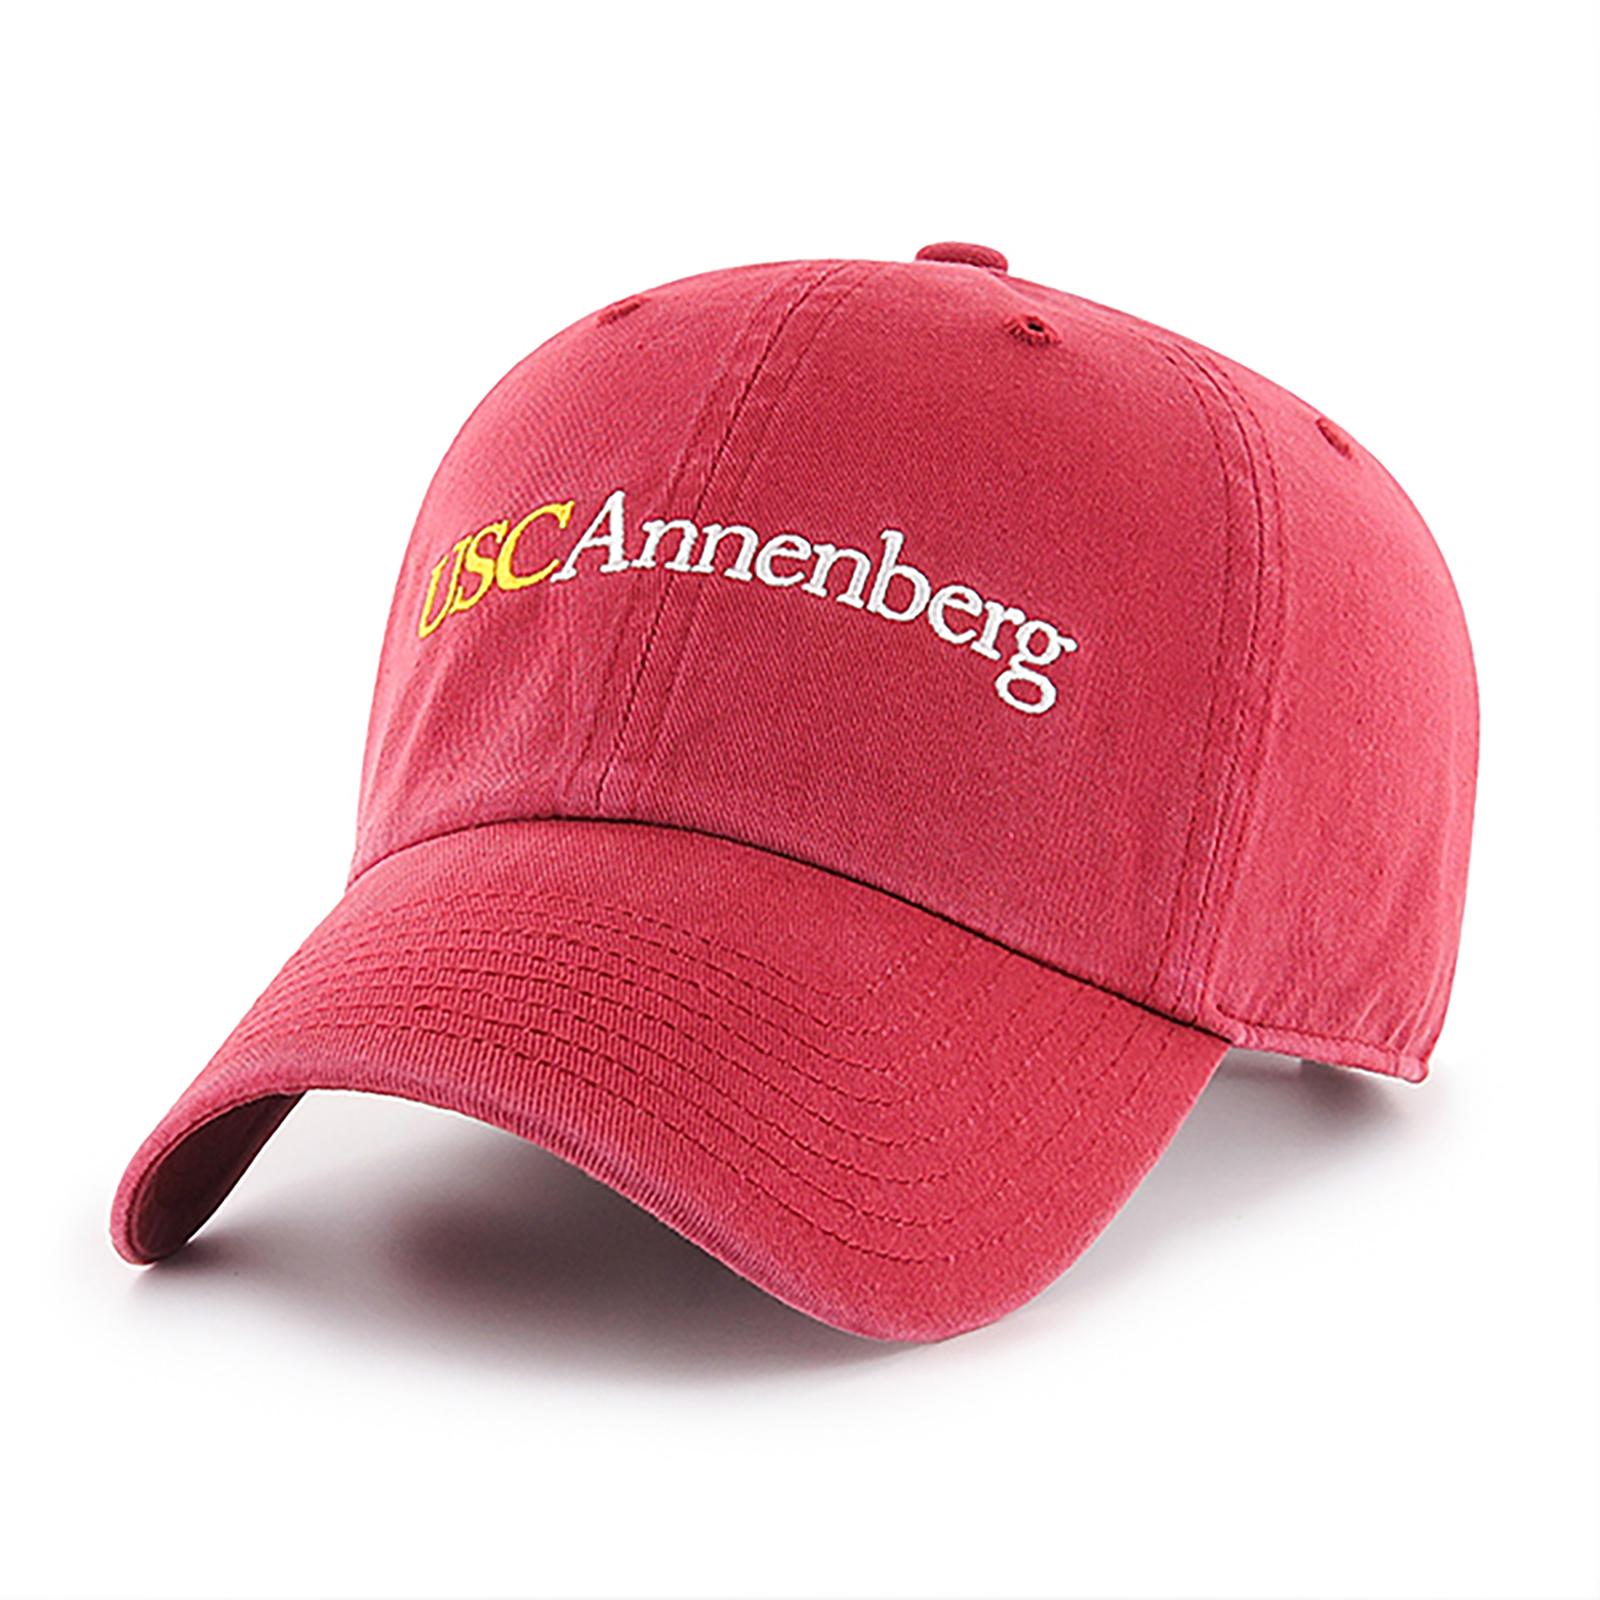 USC School of Annenberg Cap Cardinal Fits All image01